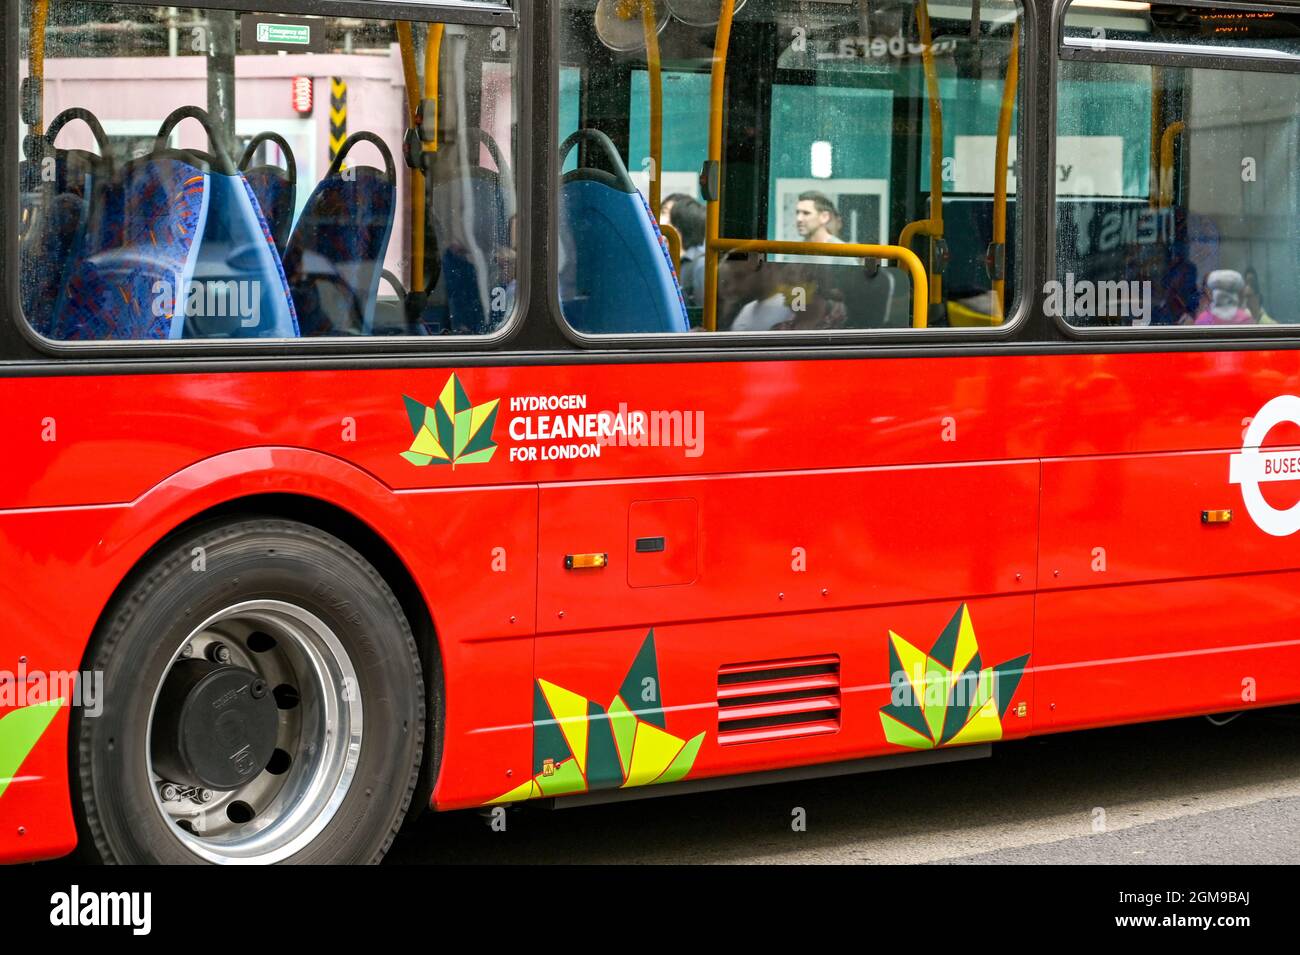 London, England - August 2021: Sign on the side of a London bus fully powered by hydrogen gas. Stock Photo